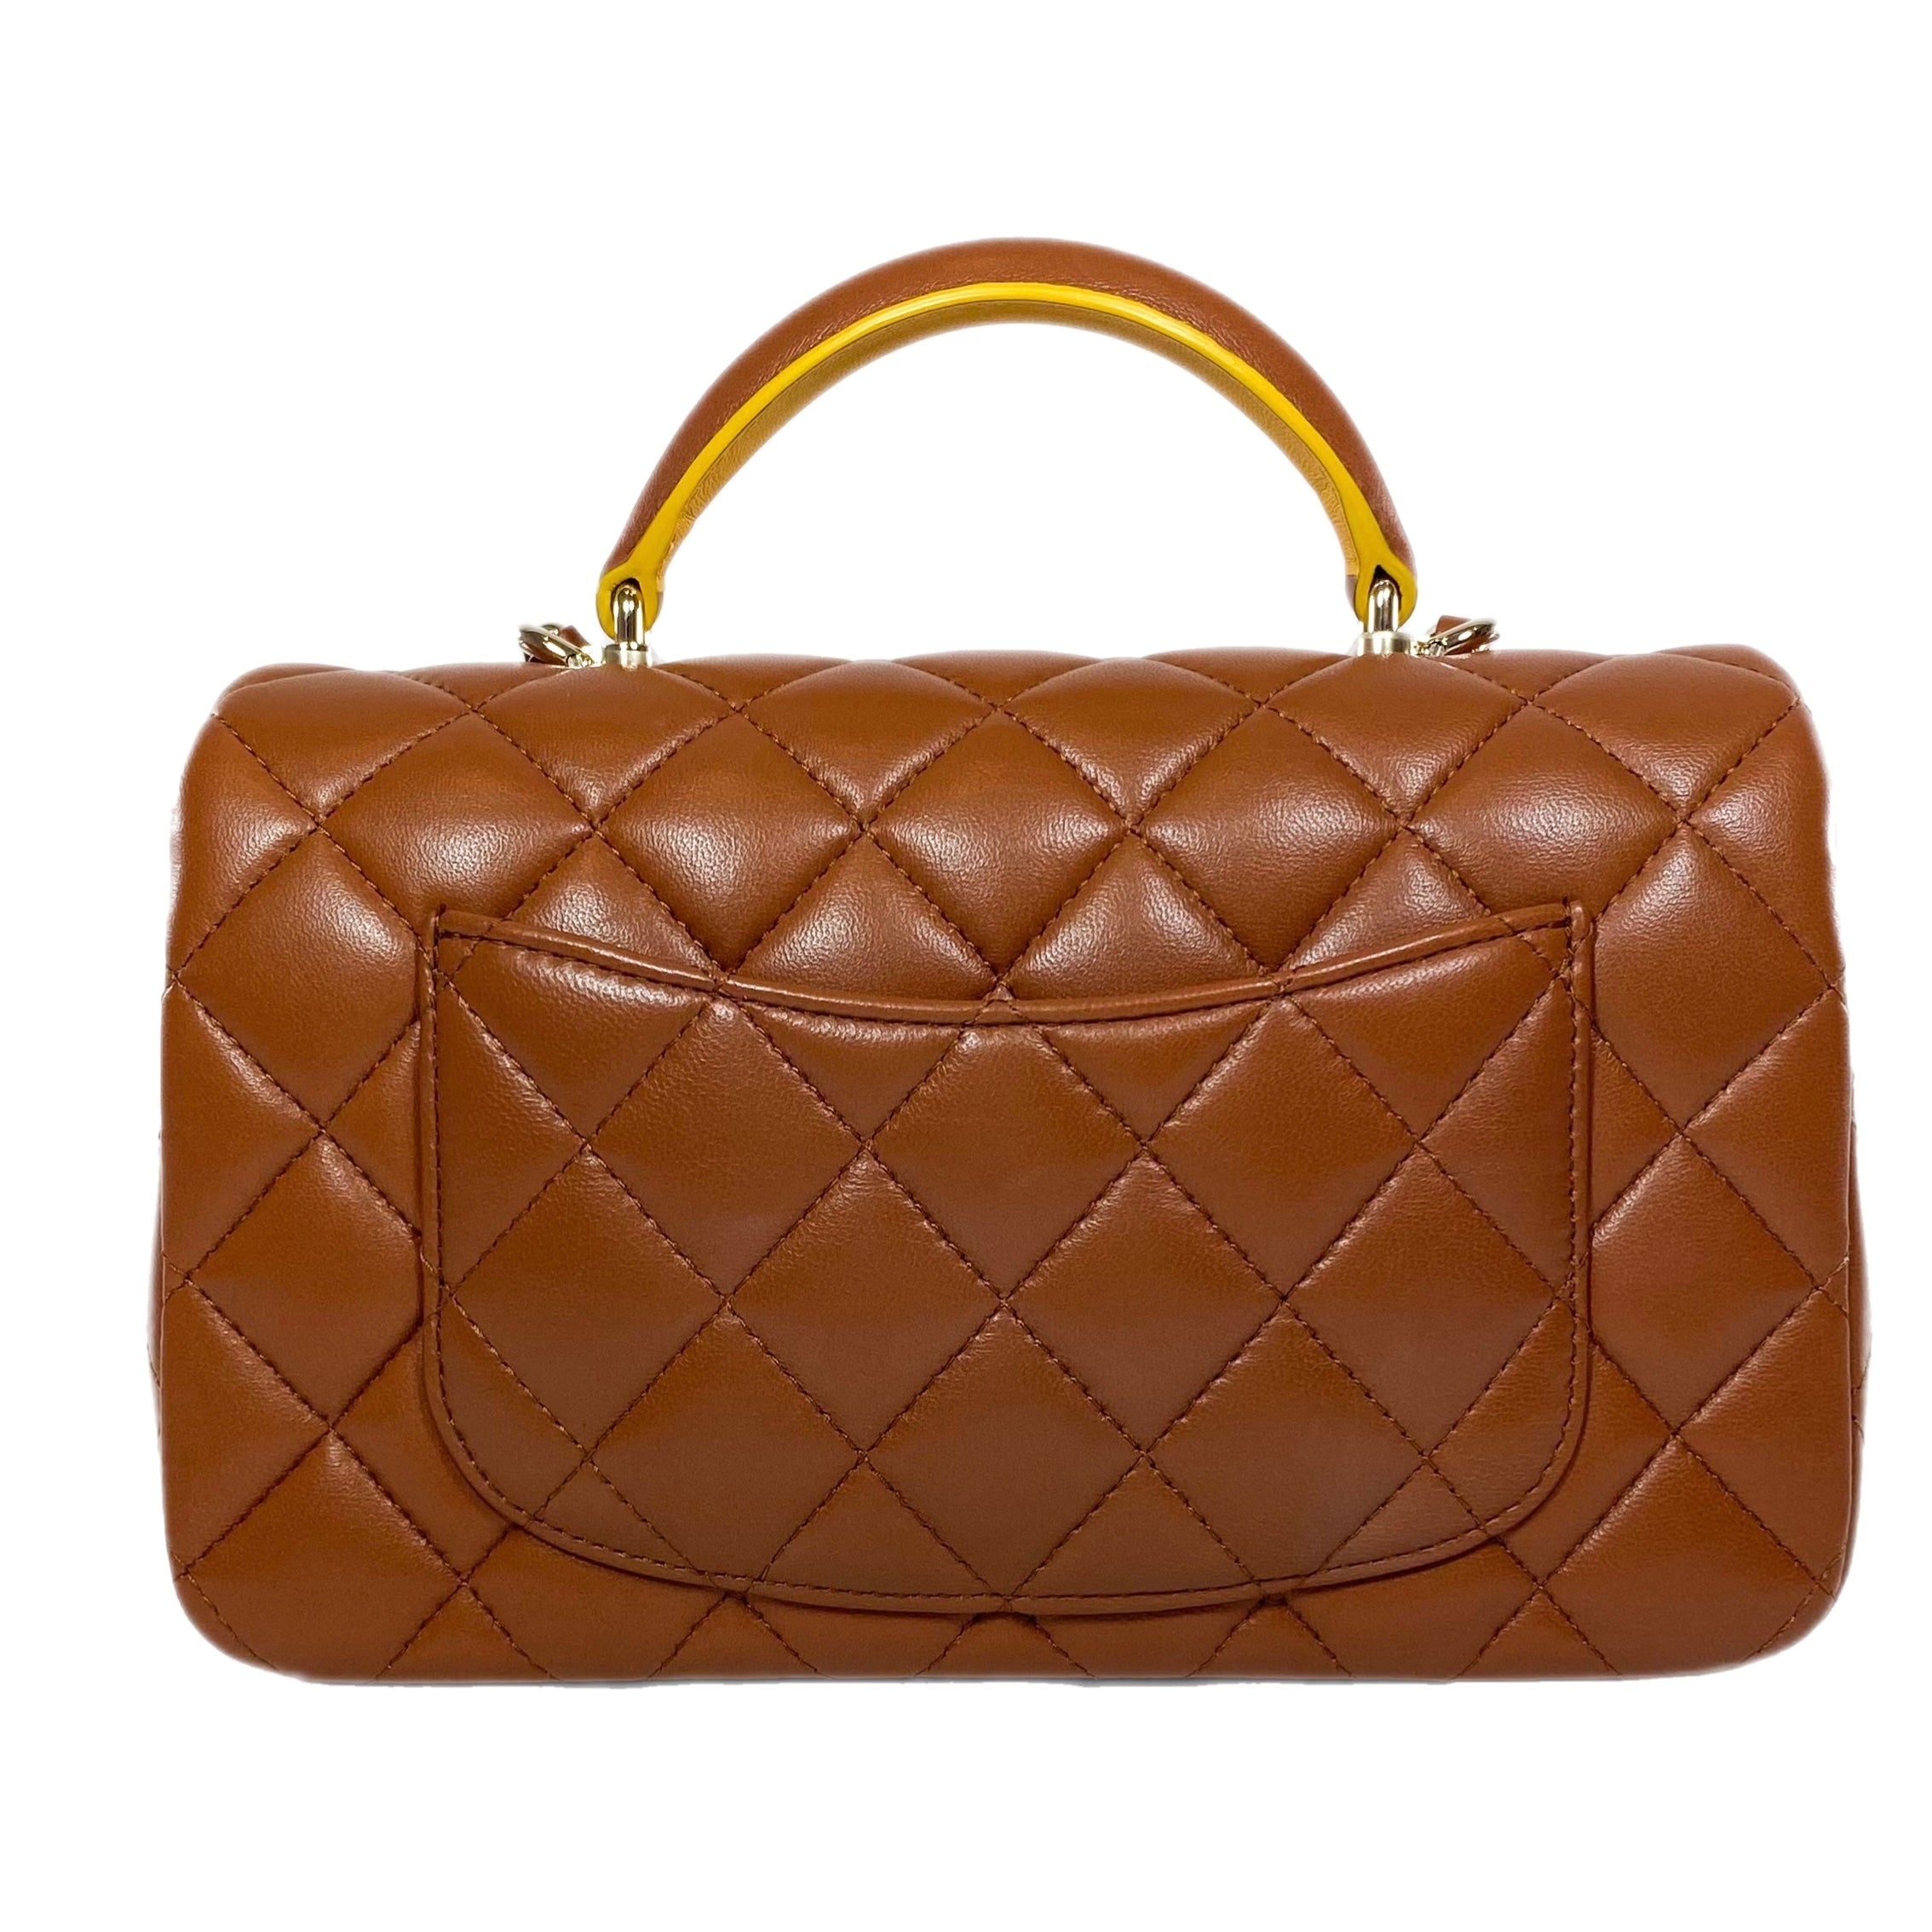 Chanel Quilted Lambskin Brown and Yellow Mini Top Handle Flap Bag